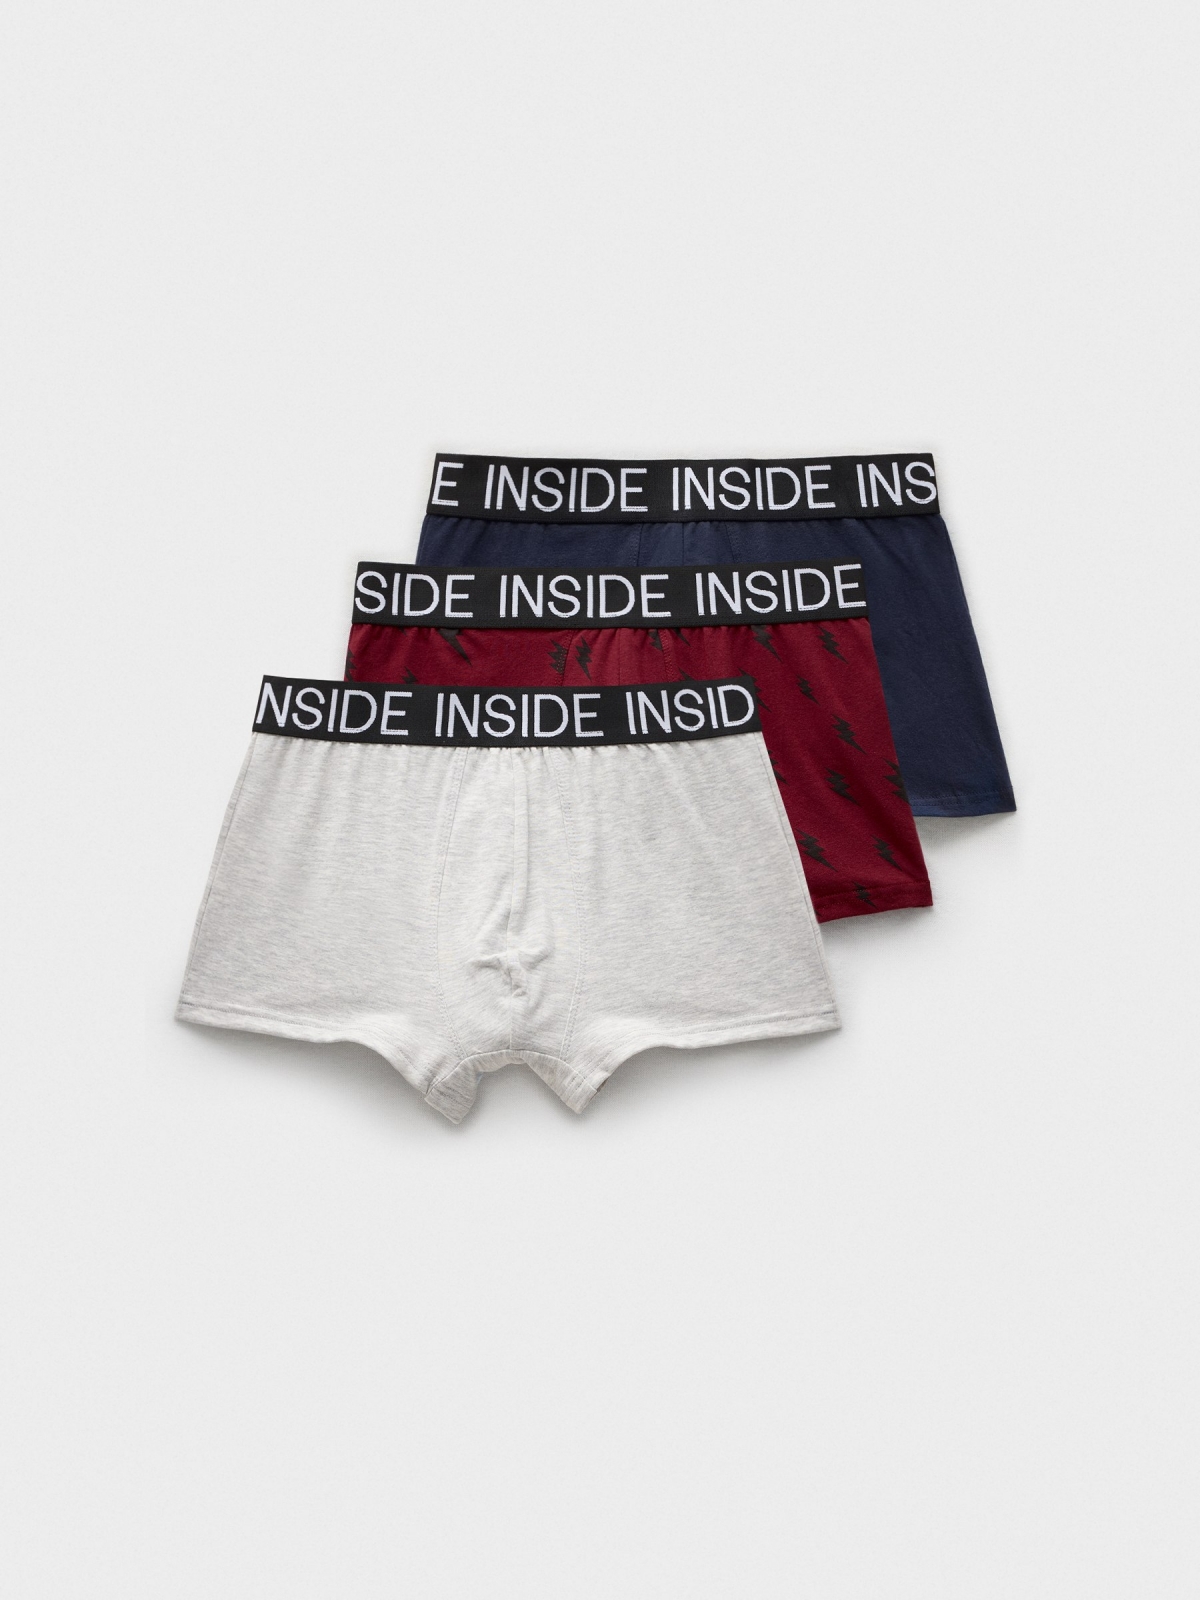 Boxer briefs 6 pack with a model